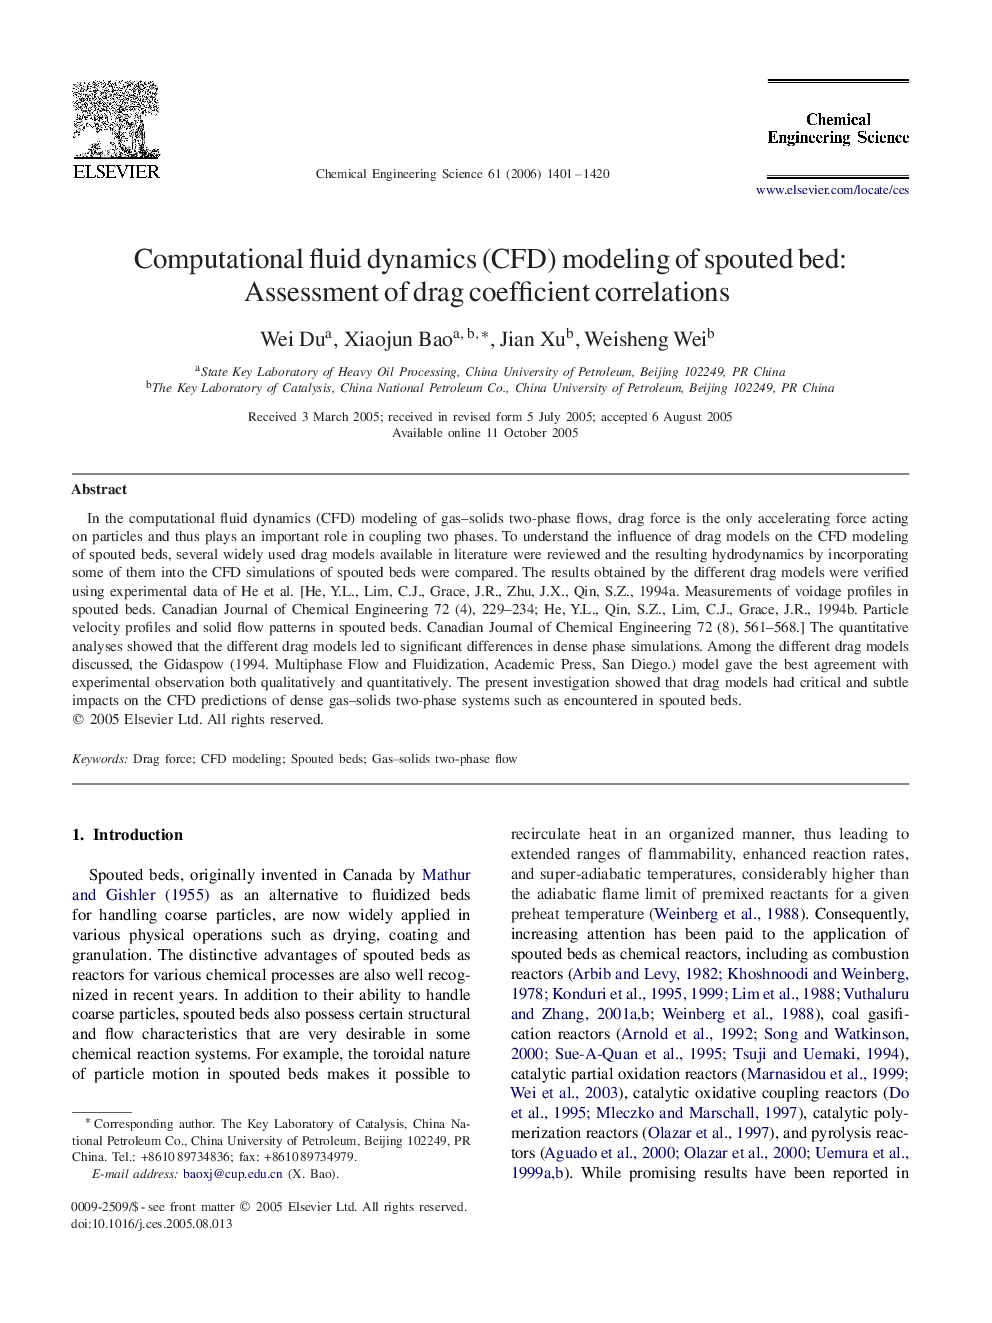 Computational fluid dynamics (CFD) modeling of spouted bed: Assessment of drag coefficient correlations